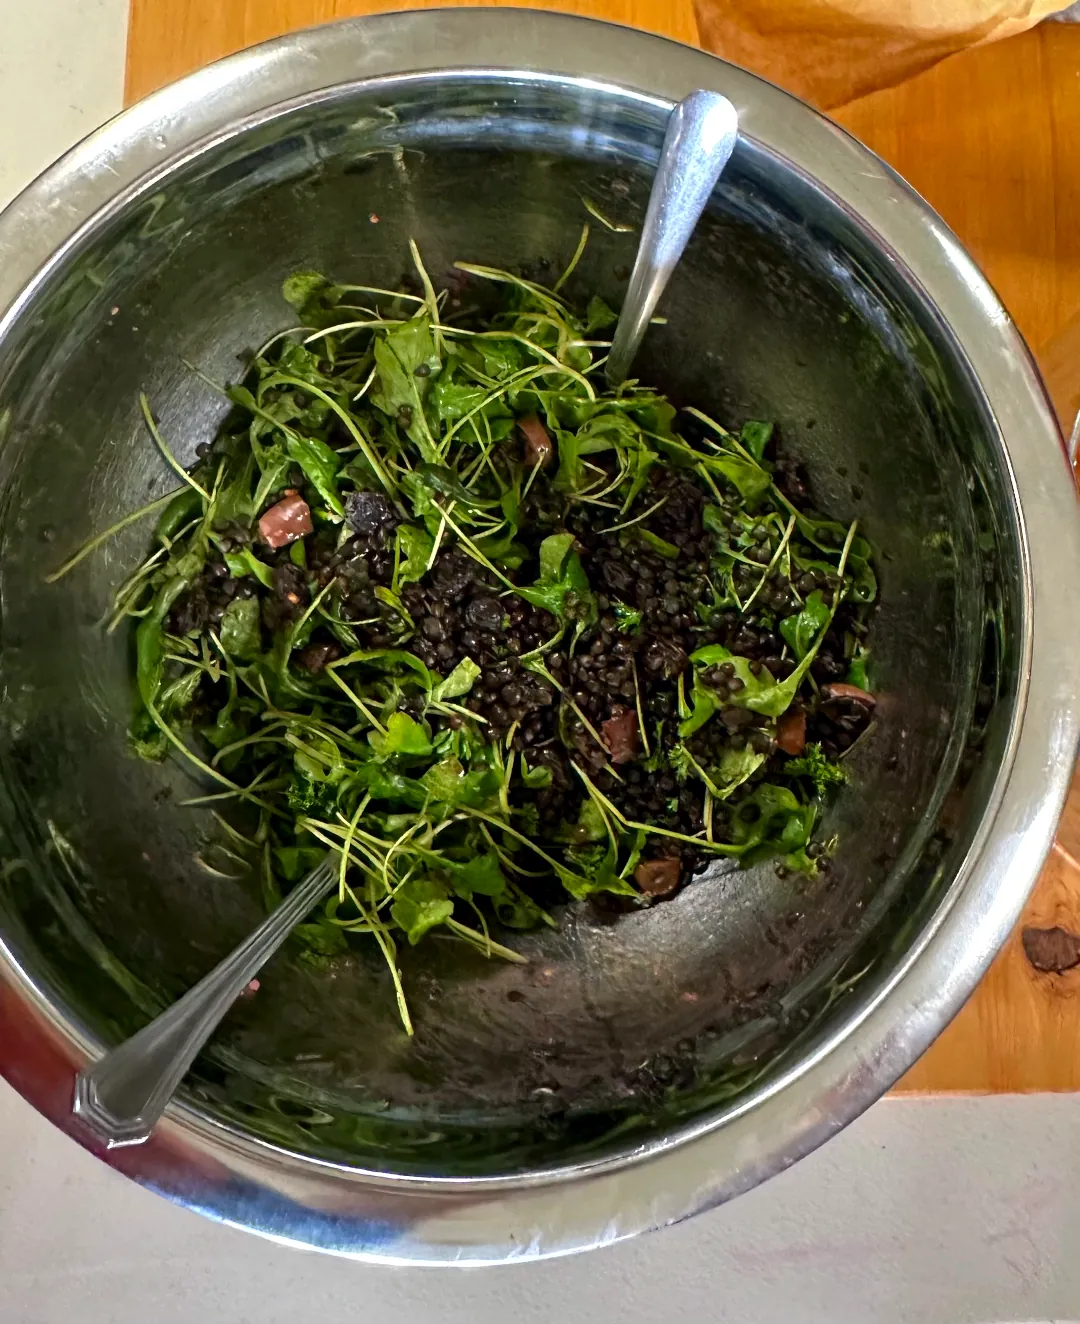 A stainless steel bowl with two utensils pushed into the Lentil Salad.